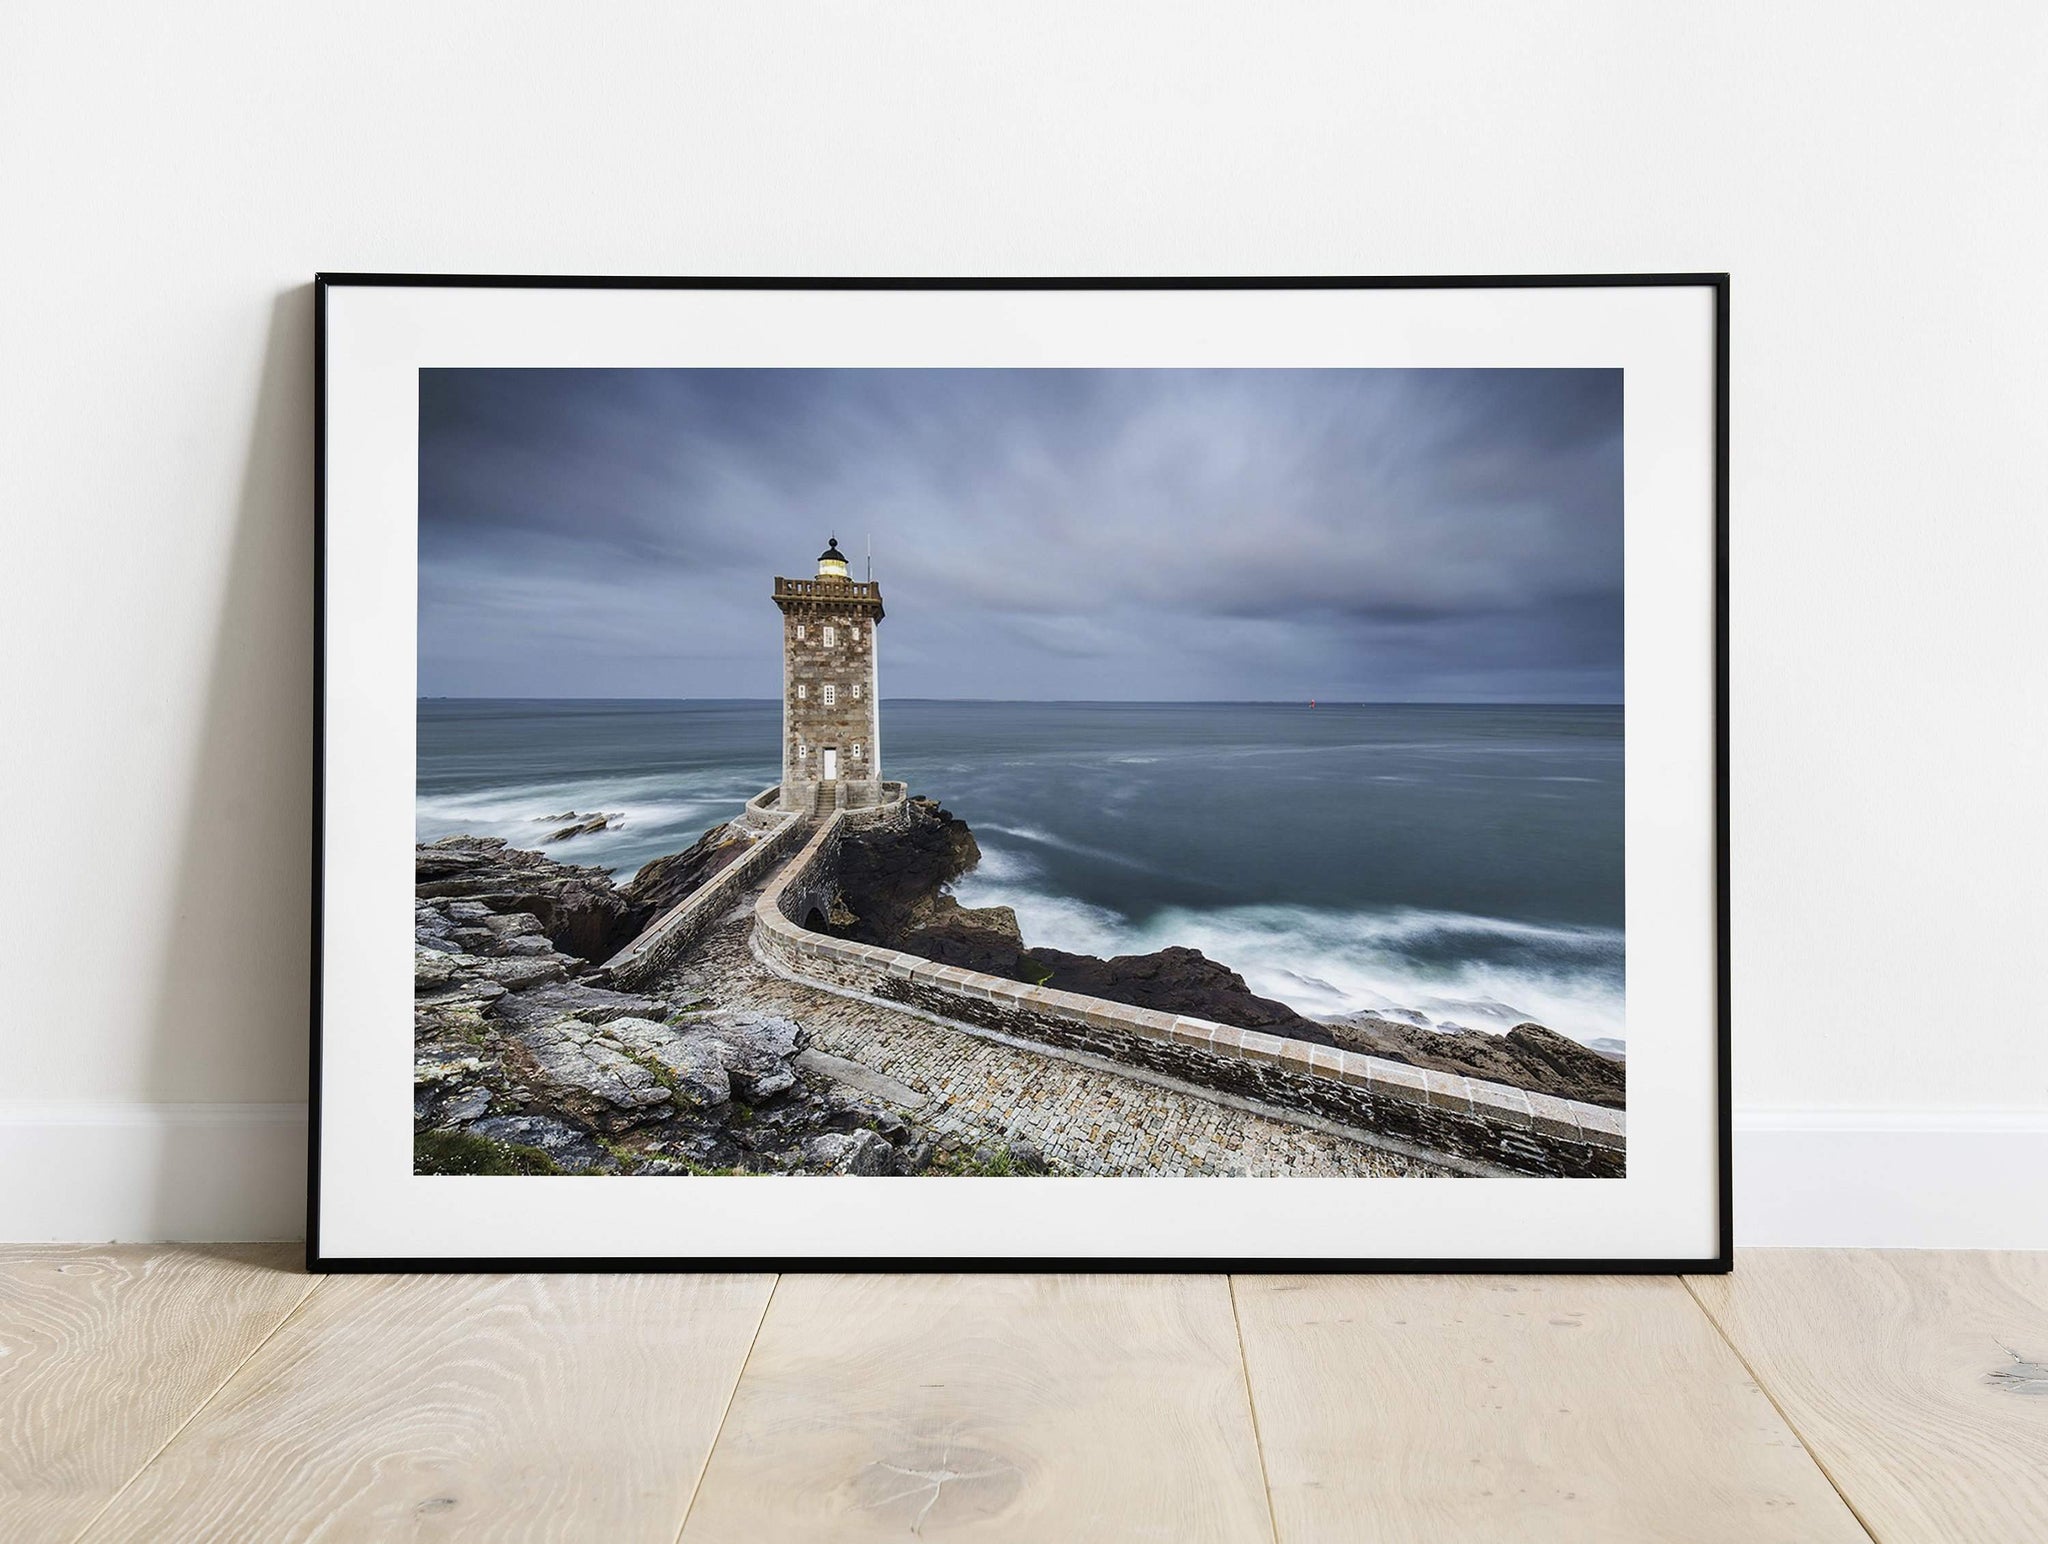 See our full range of french wall art and Brittany framed prints for sale from europe